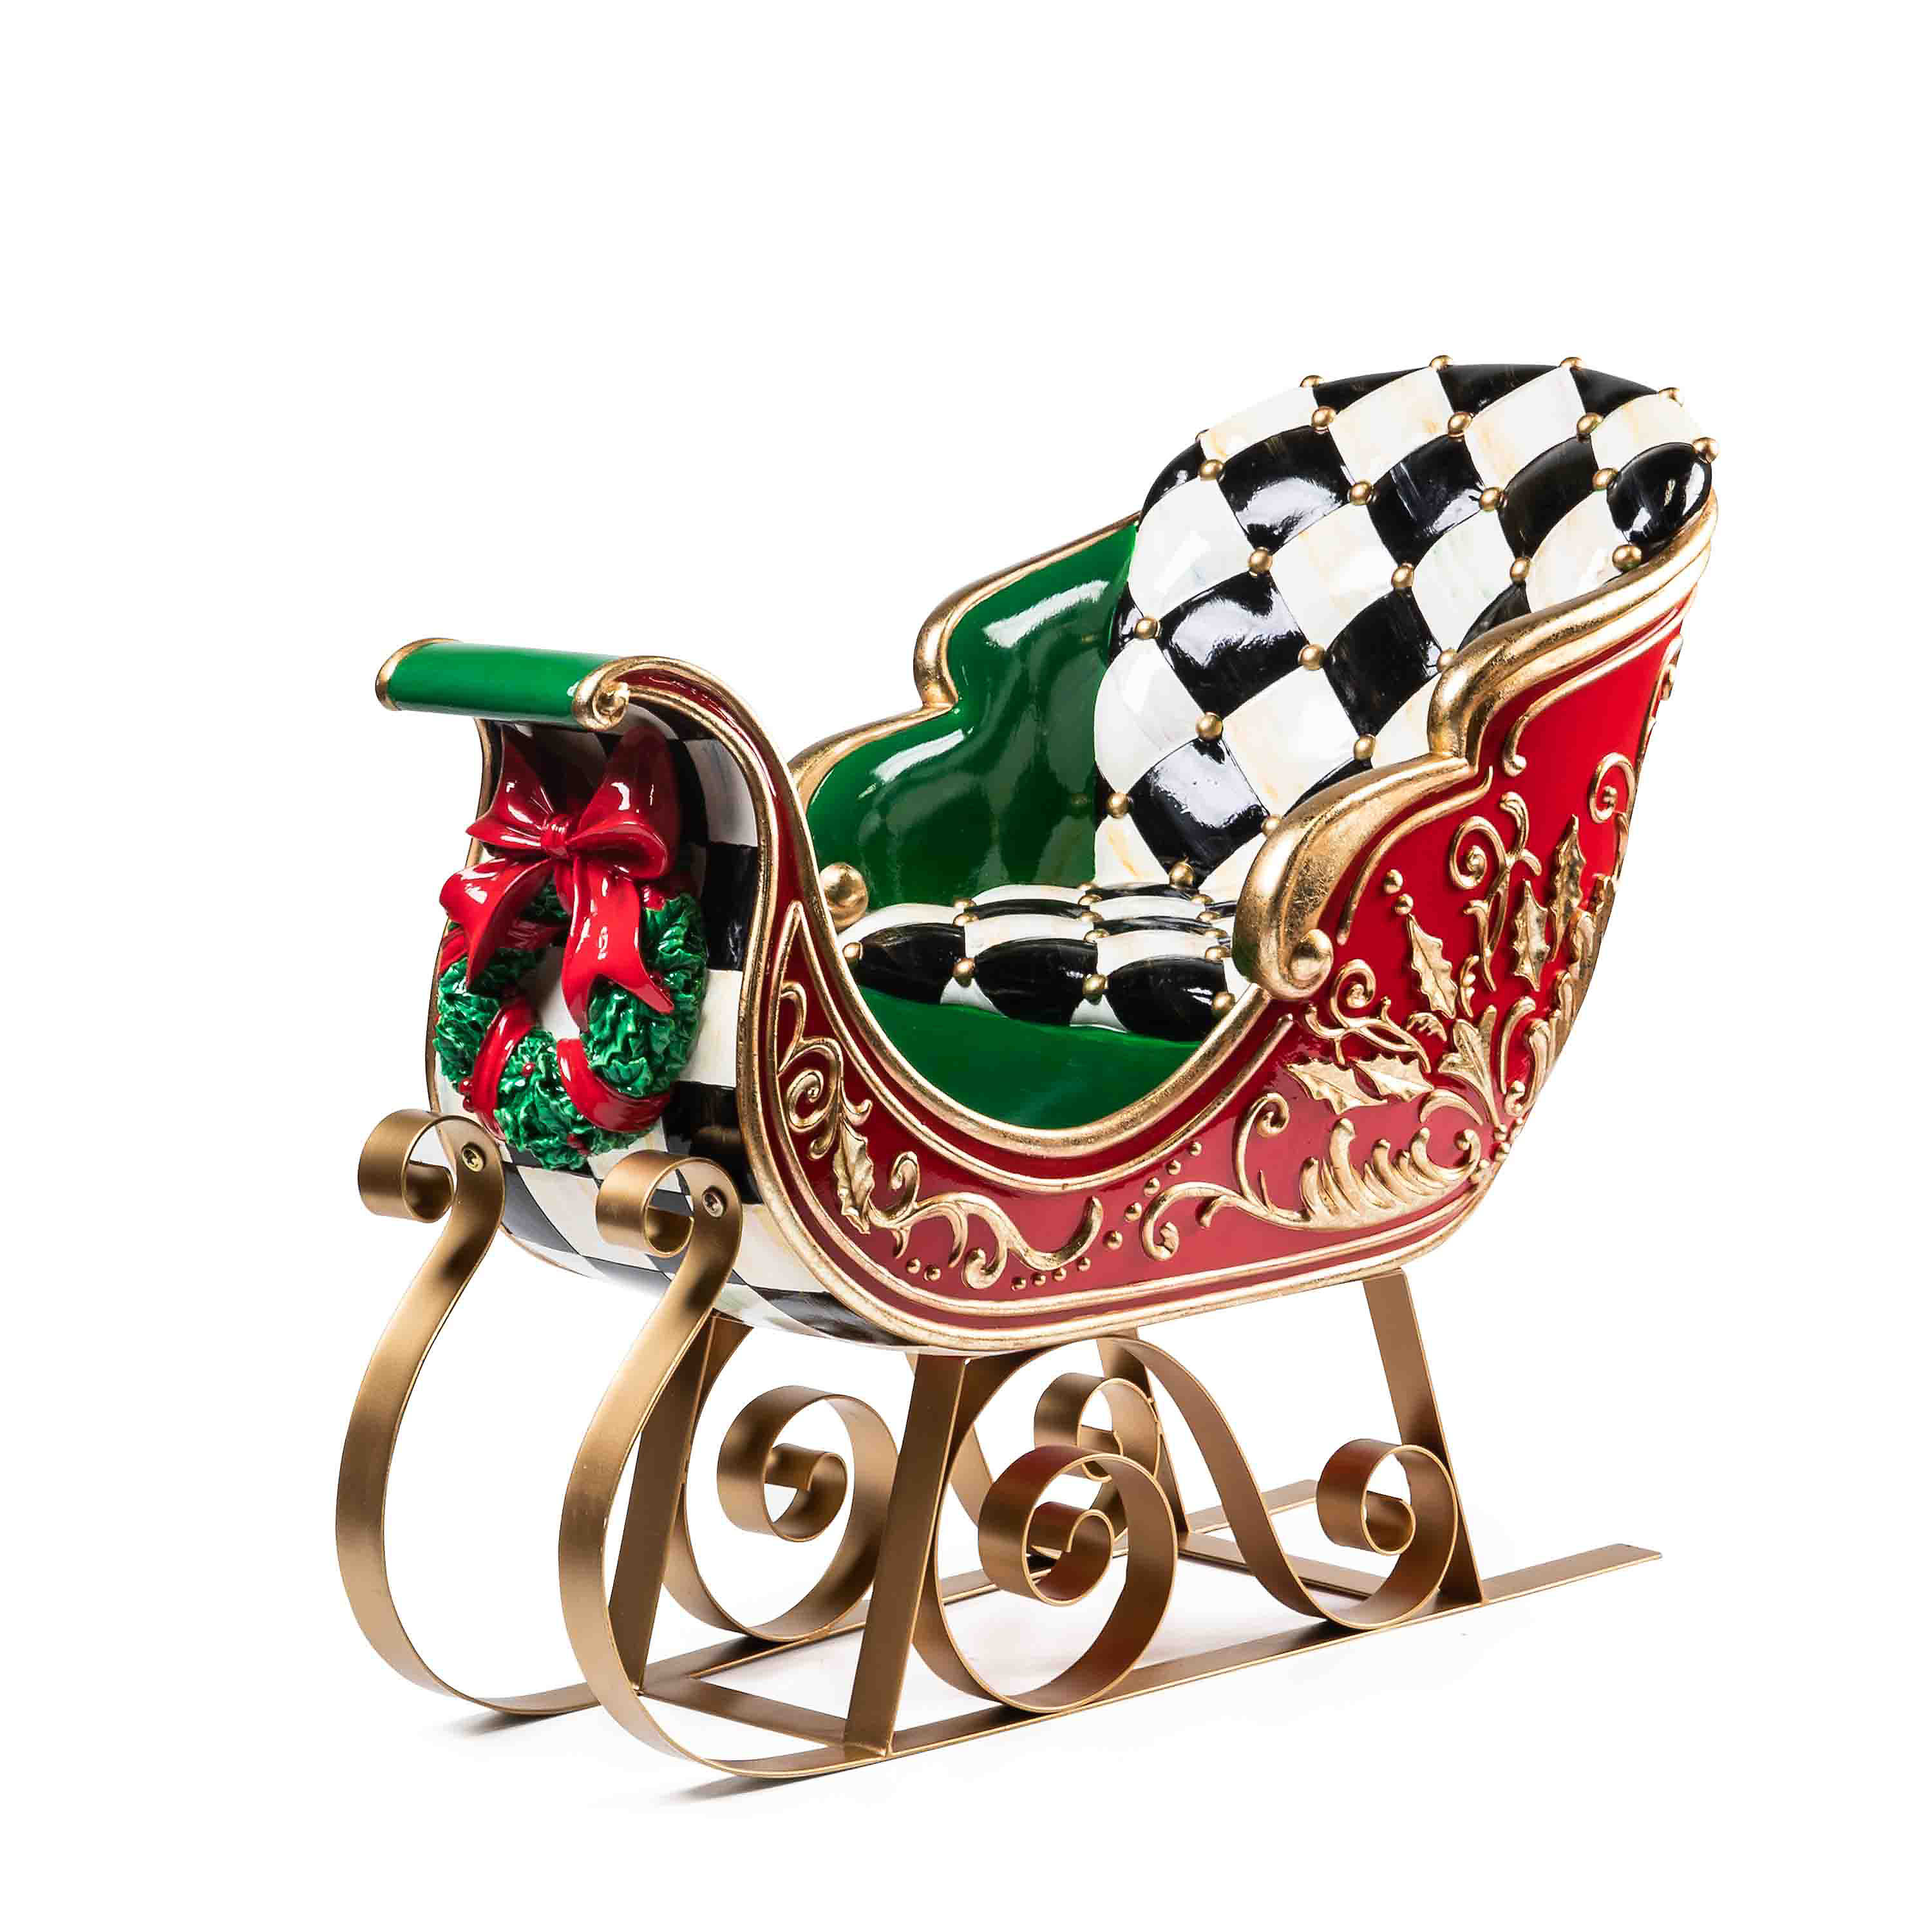 Courtly Check Luxe Trophy Sleigh mackenzie-childs Panama 0